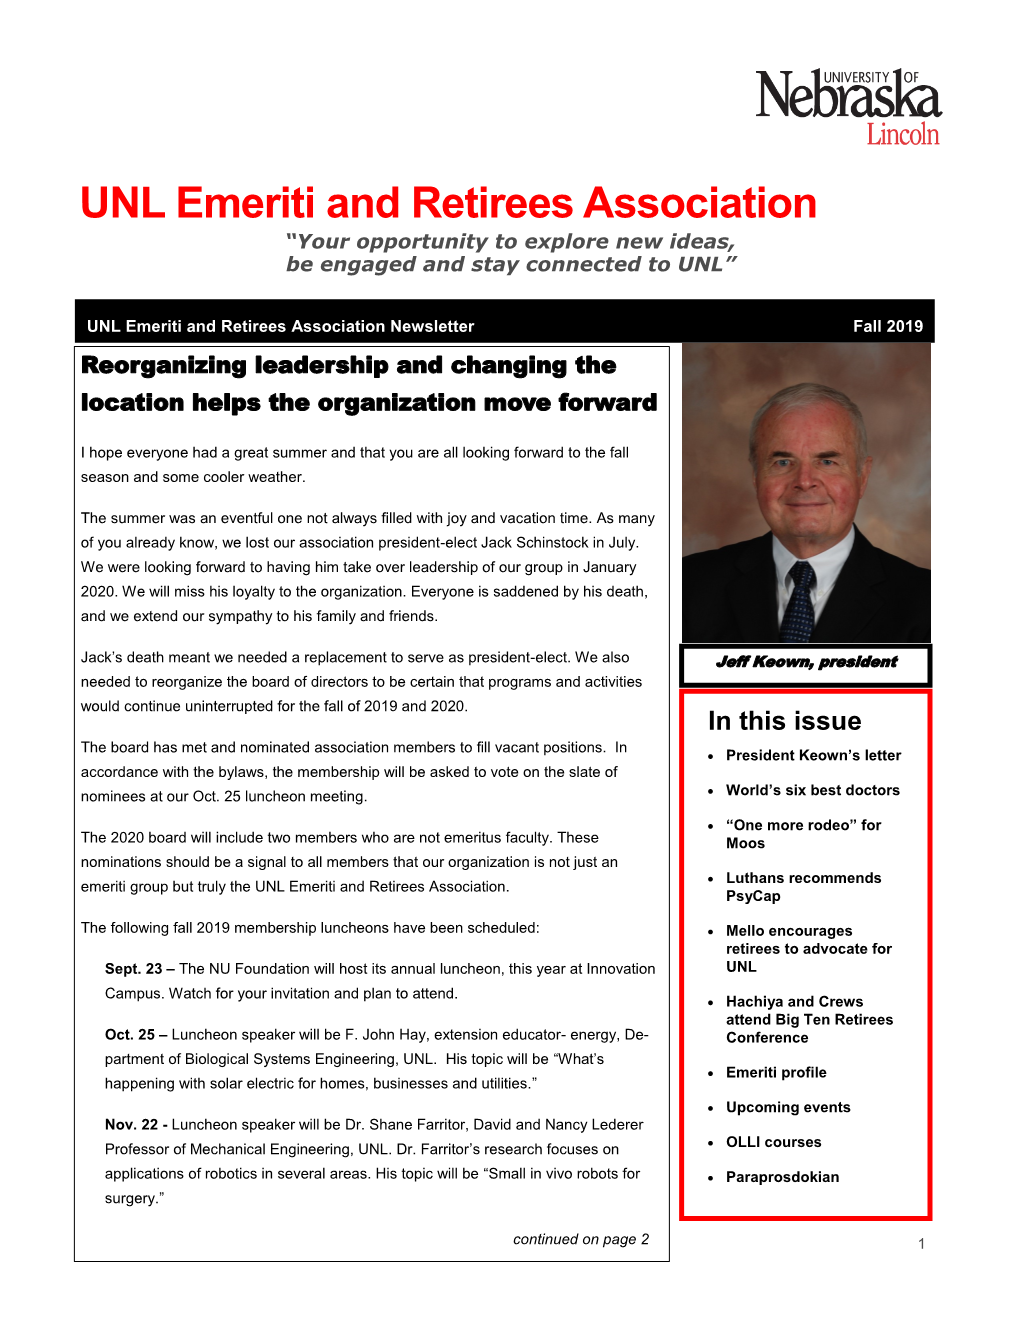 UNL Emeriti and Retirees Association “Your Opportunity to Explore New Ideas, Be Engaged and Stay Connected to UNL”